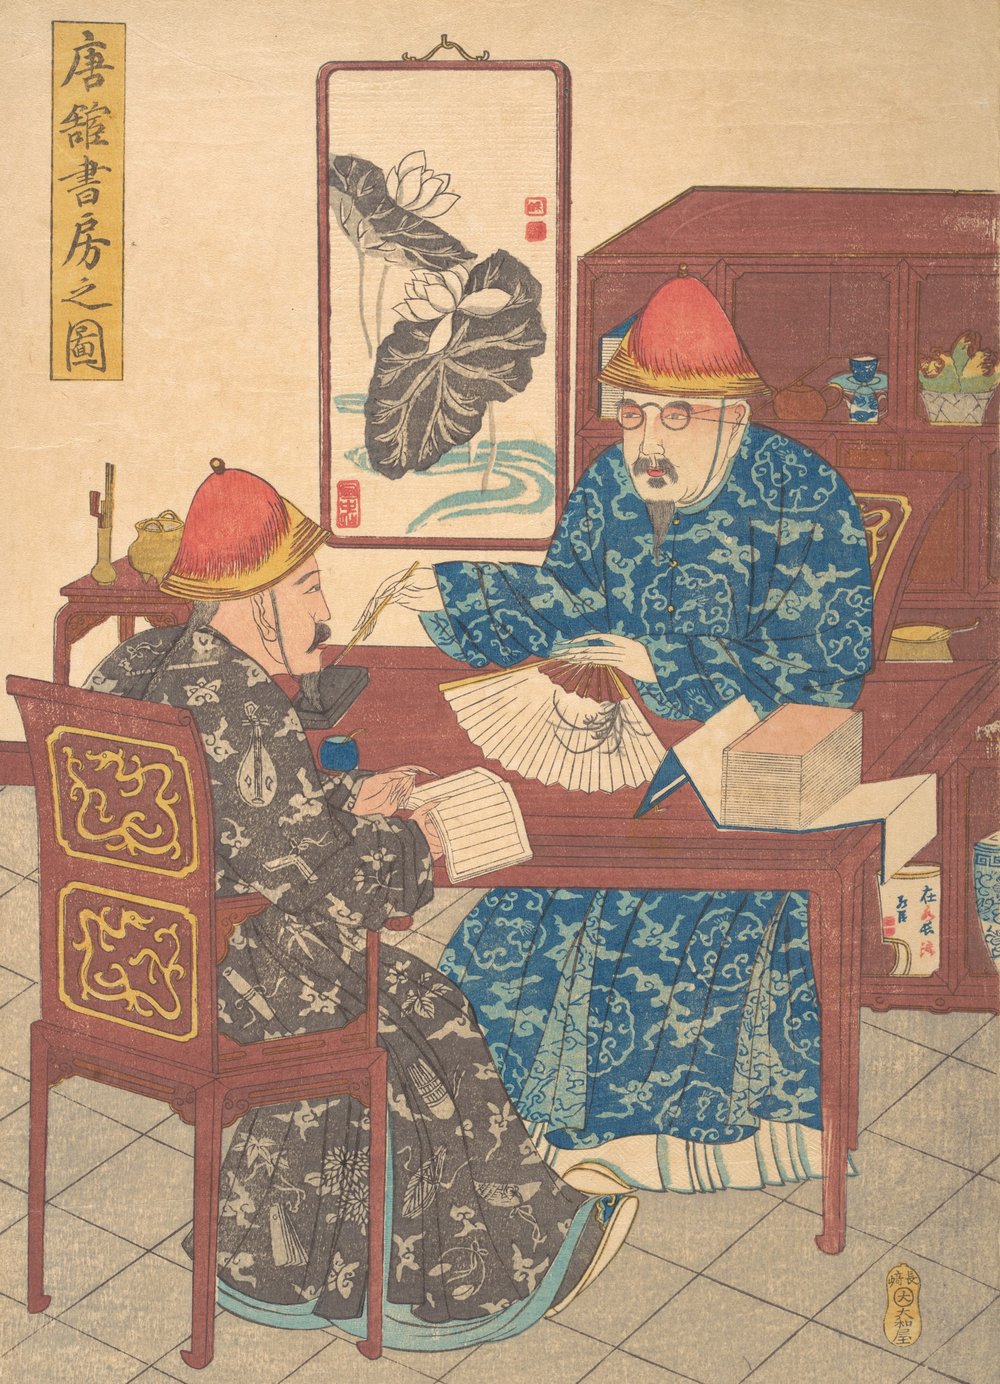 Two Chinese Scholars Practicing Calligraphy in Their Studio